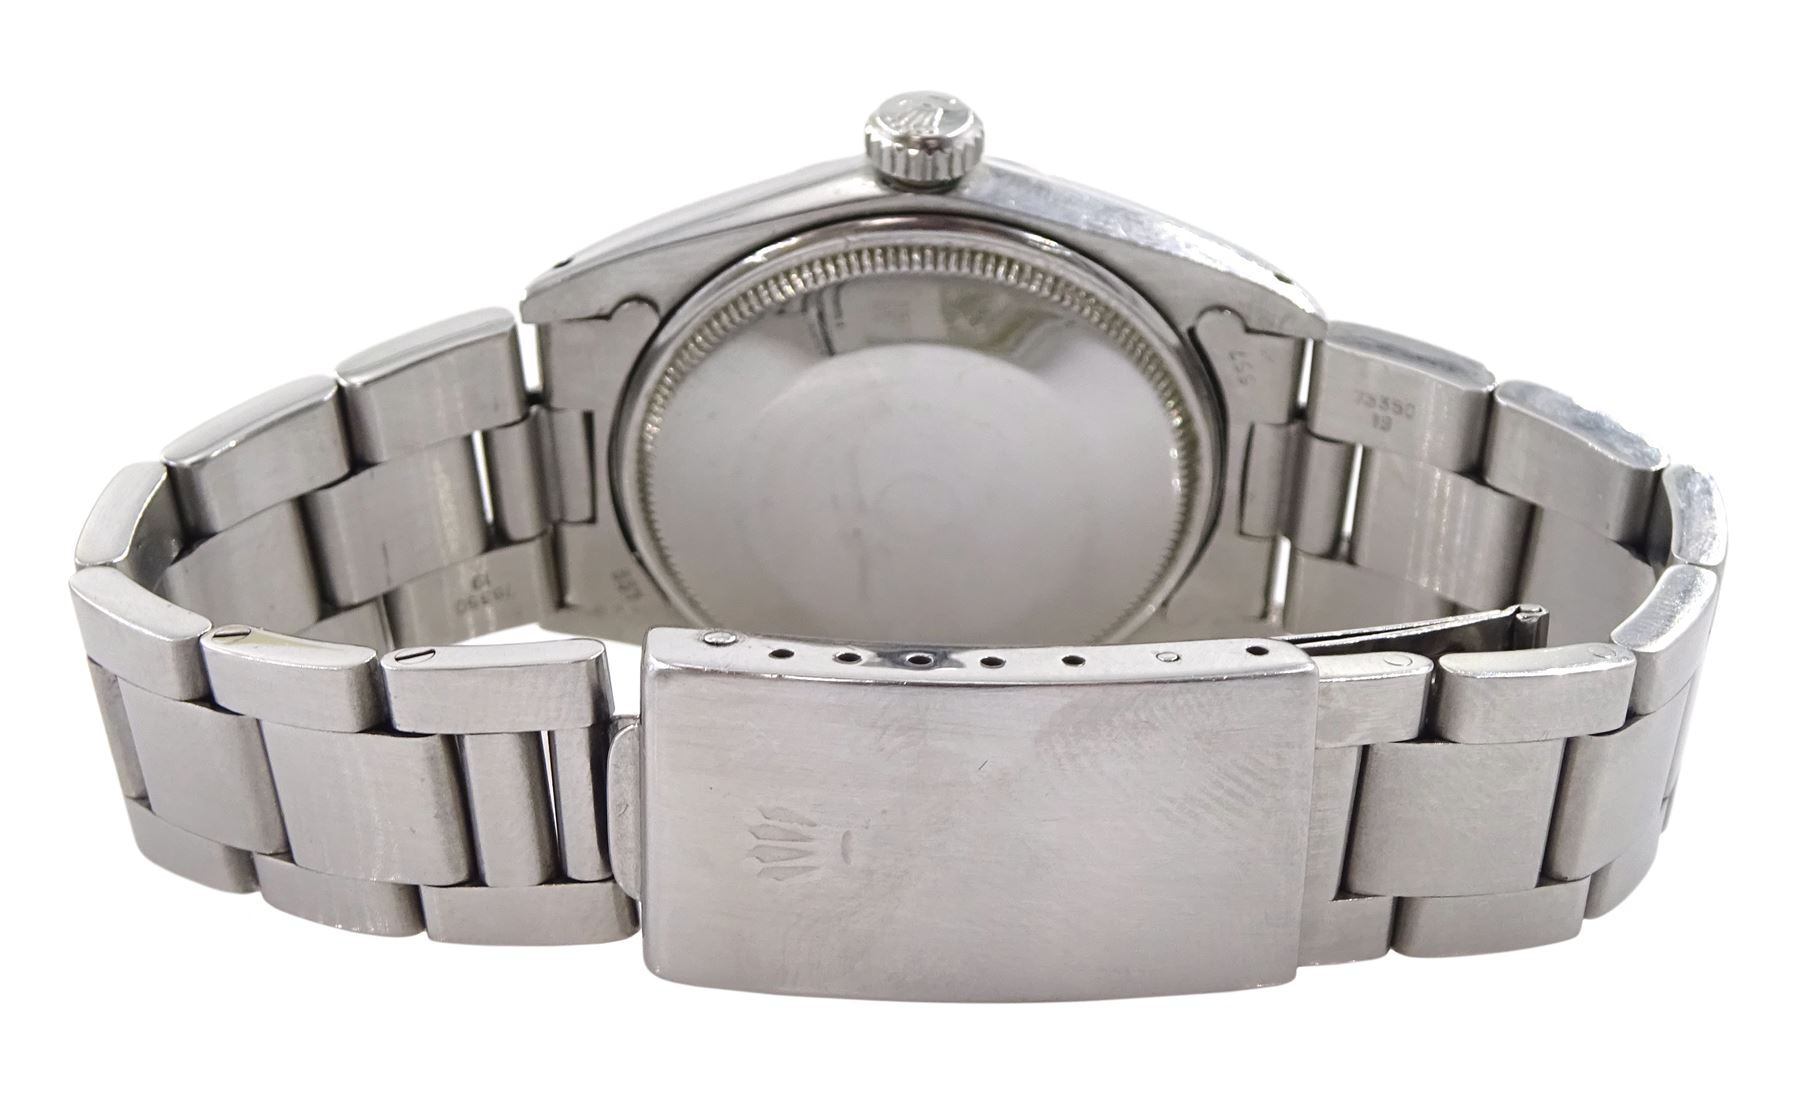 Rolex Oyster Perpetual gentleman's stainless steel automatic wristwatch - Image 3 of 6